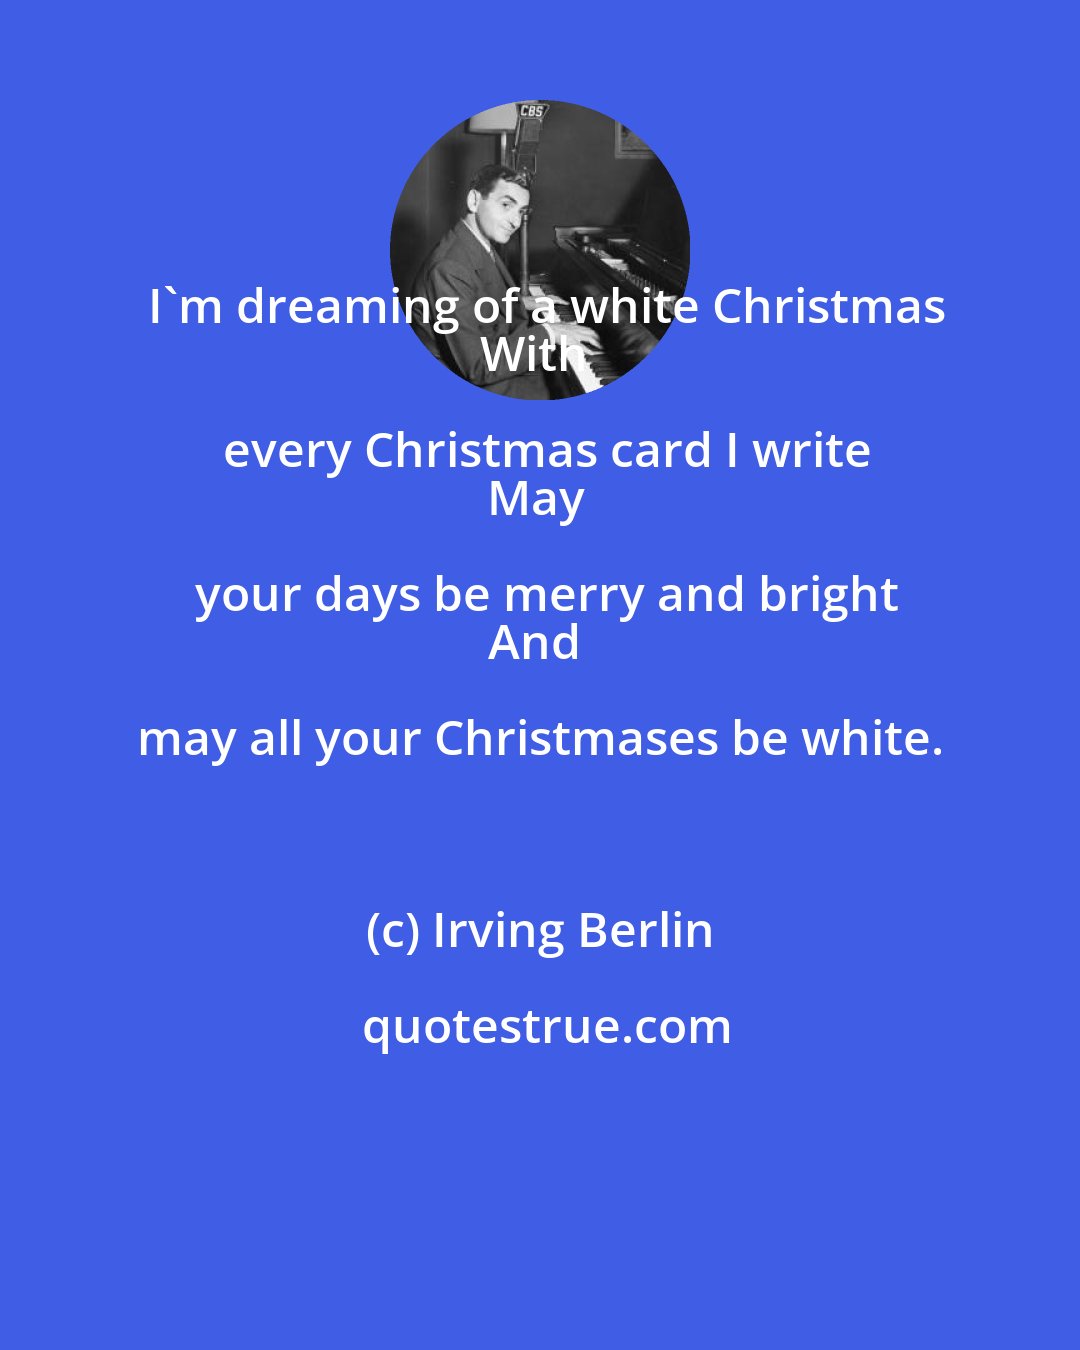 Irving Berlin: I'm dreaming of a white Christmas
With every Christmas card I write
May your days be merry and bright
And may all your Christmases be white.